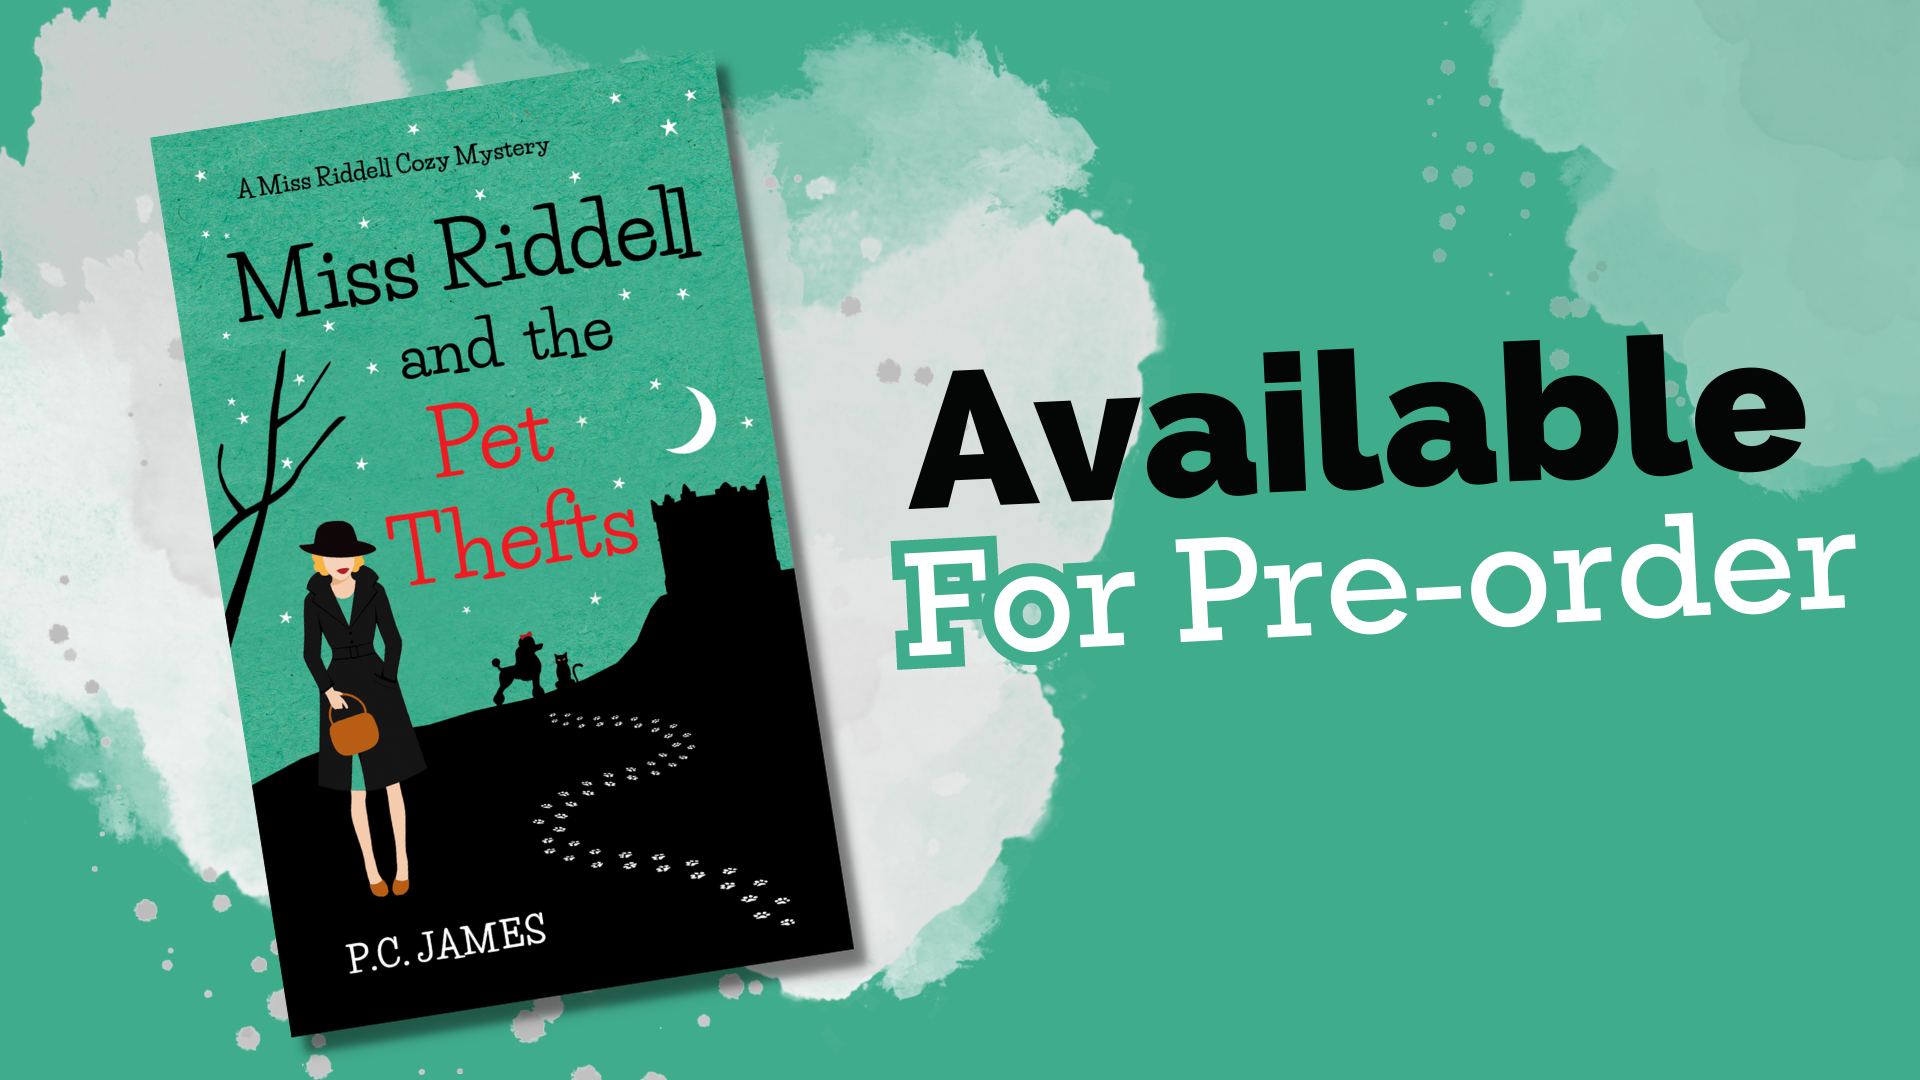 Miss Riddell and the Pet Thefts is available for Pre-Order!